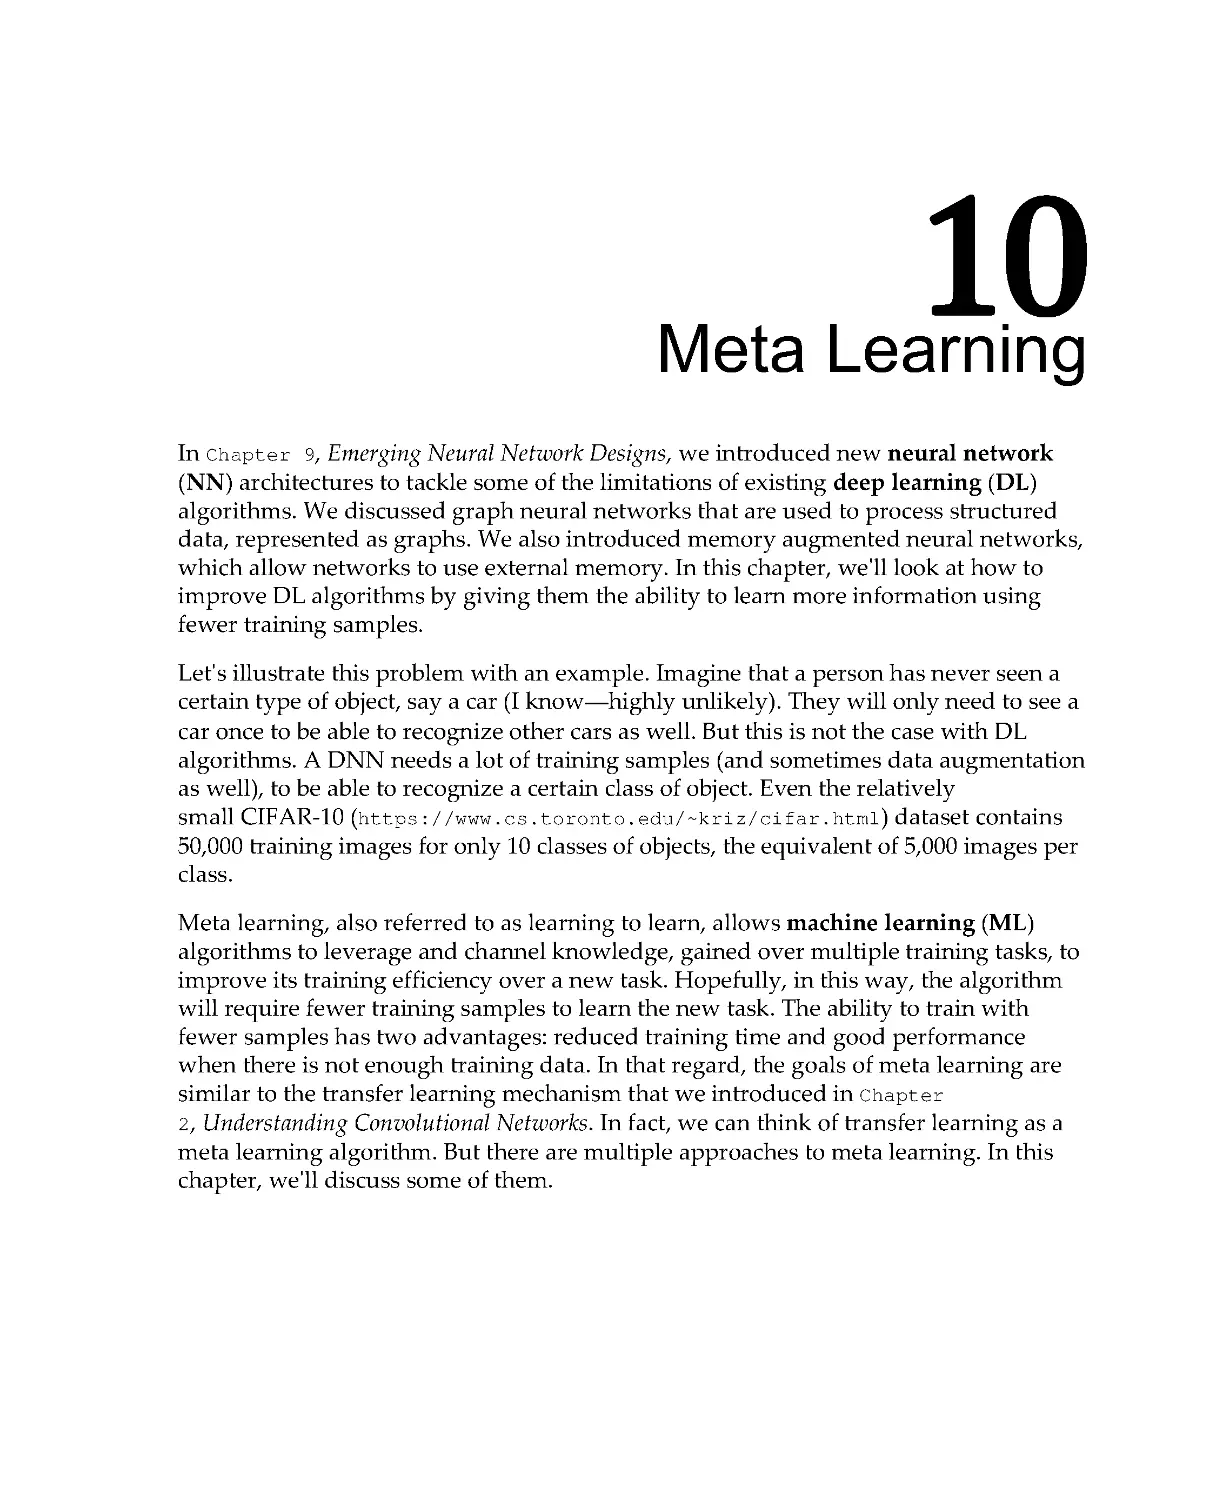 Chapter 10: Meta Learning